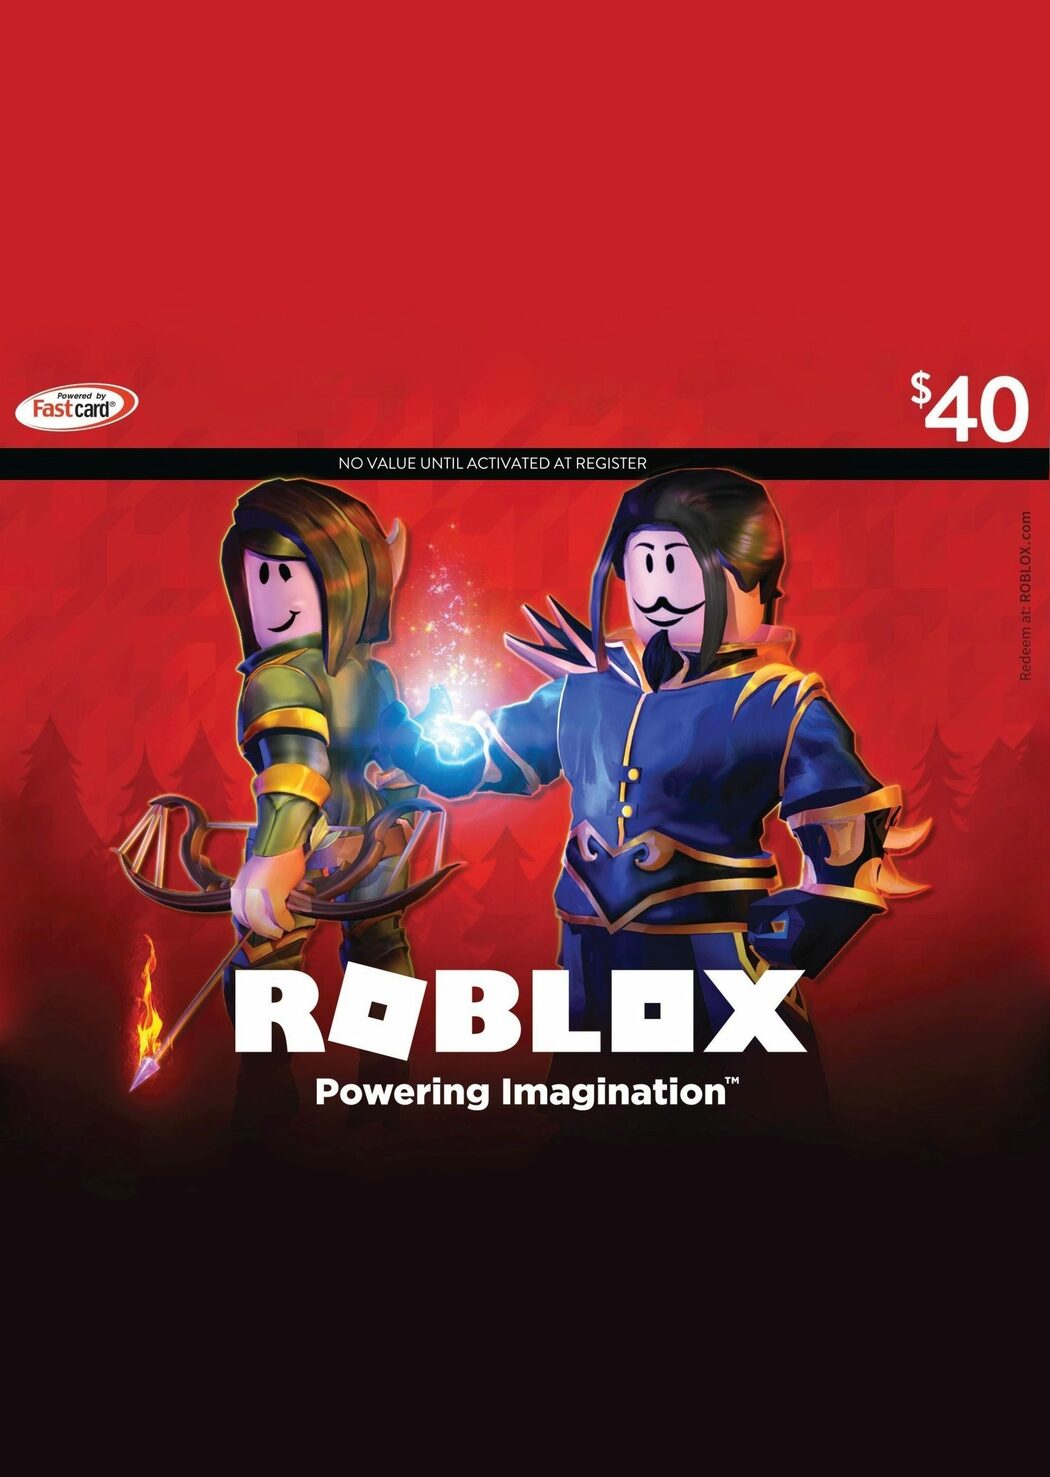 Get Robux Cash Cheap Roblox Robux Card 40 Usd Eneba - 40 robux contract roblox